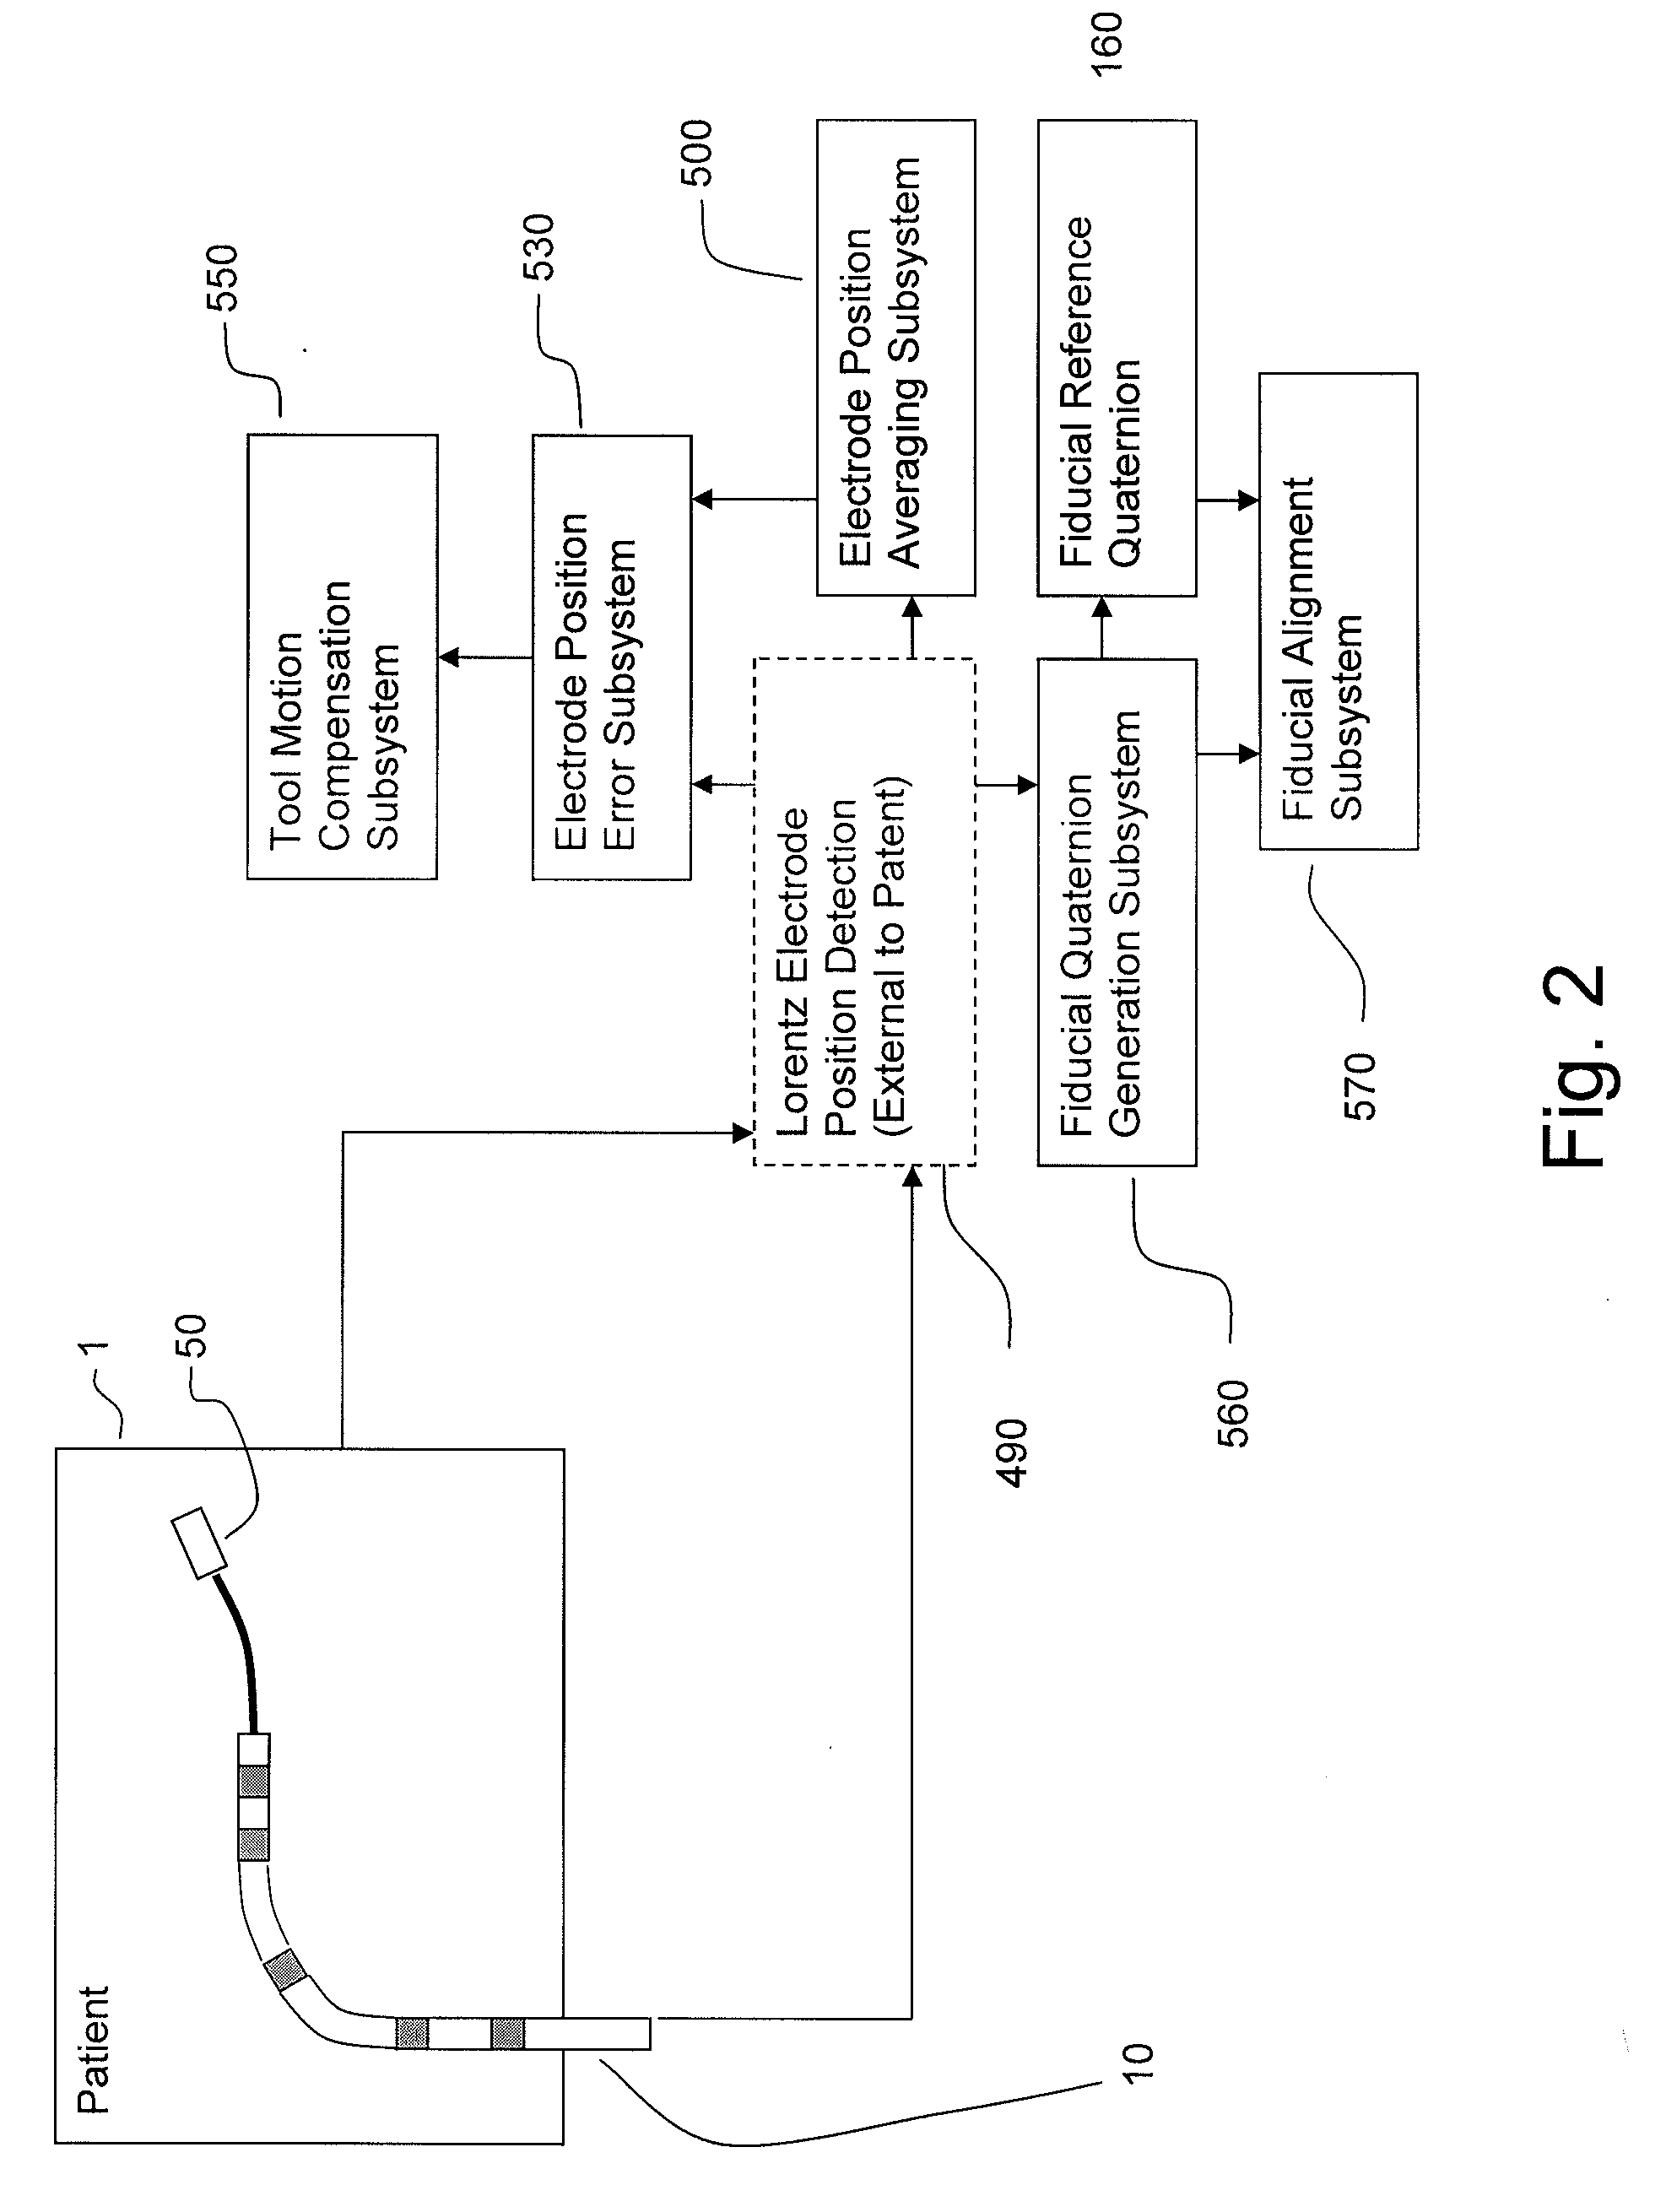 Apparatus and method for lorentz-active sheath display and control of surgical tools